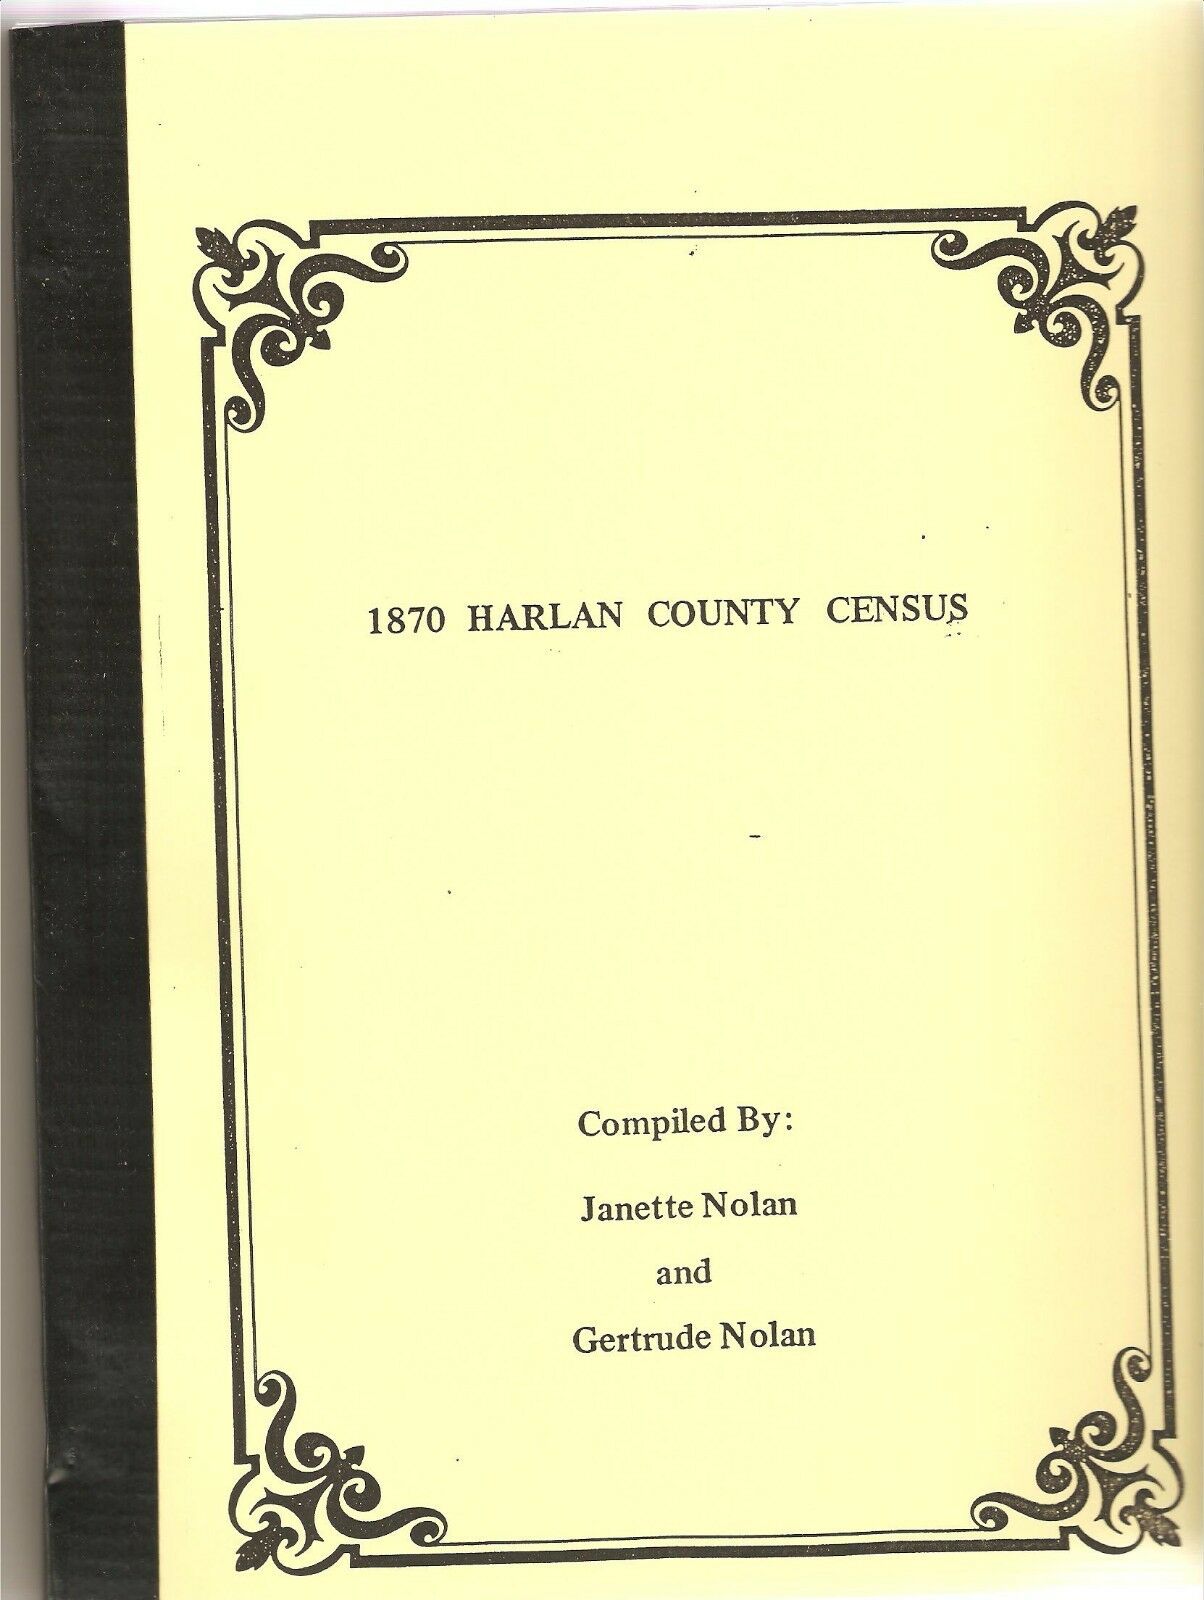 1870 Federal Census Book---harlan County Ky